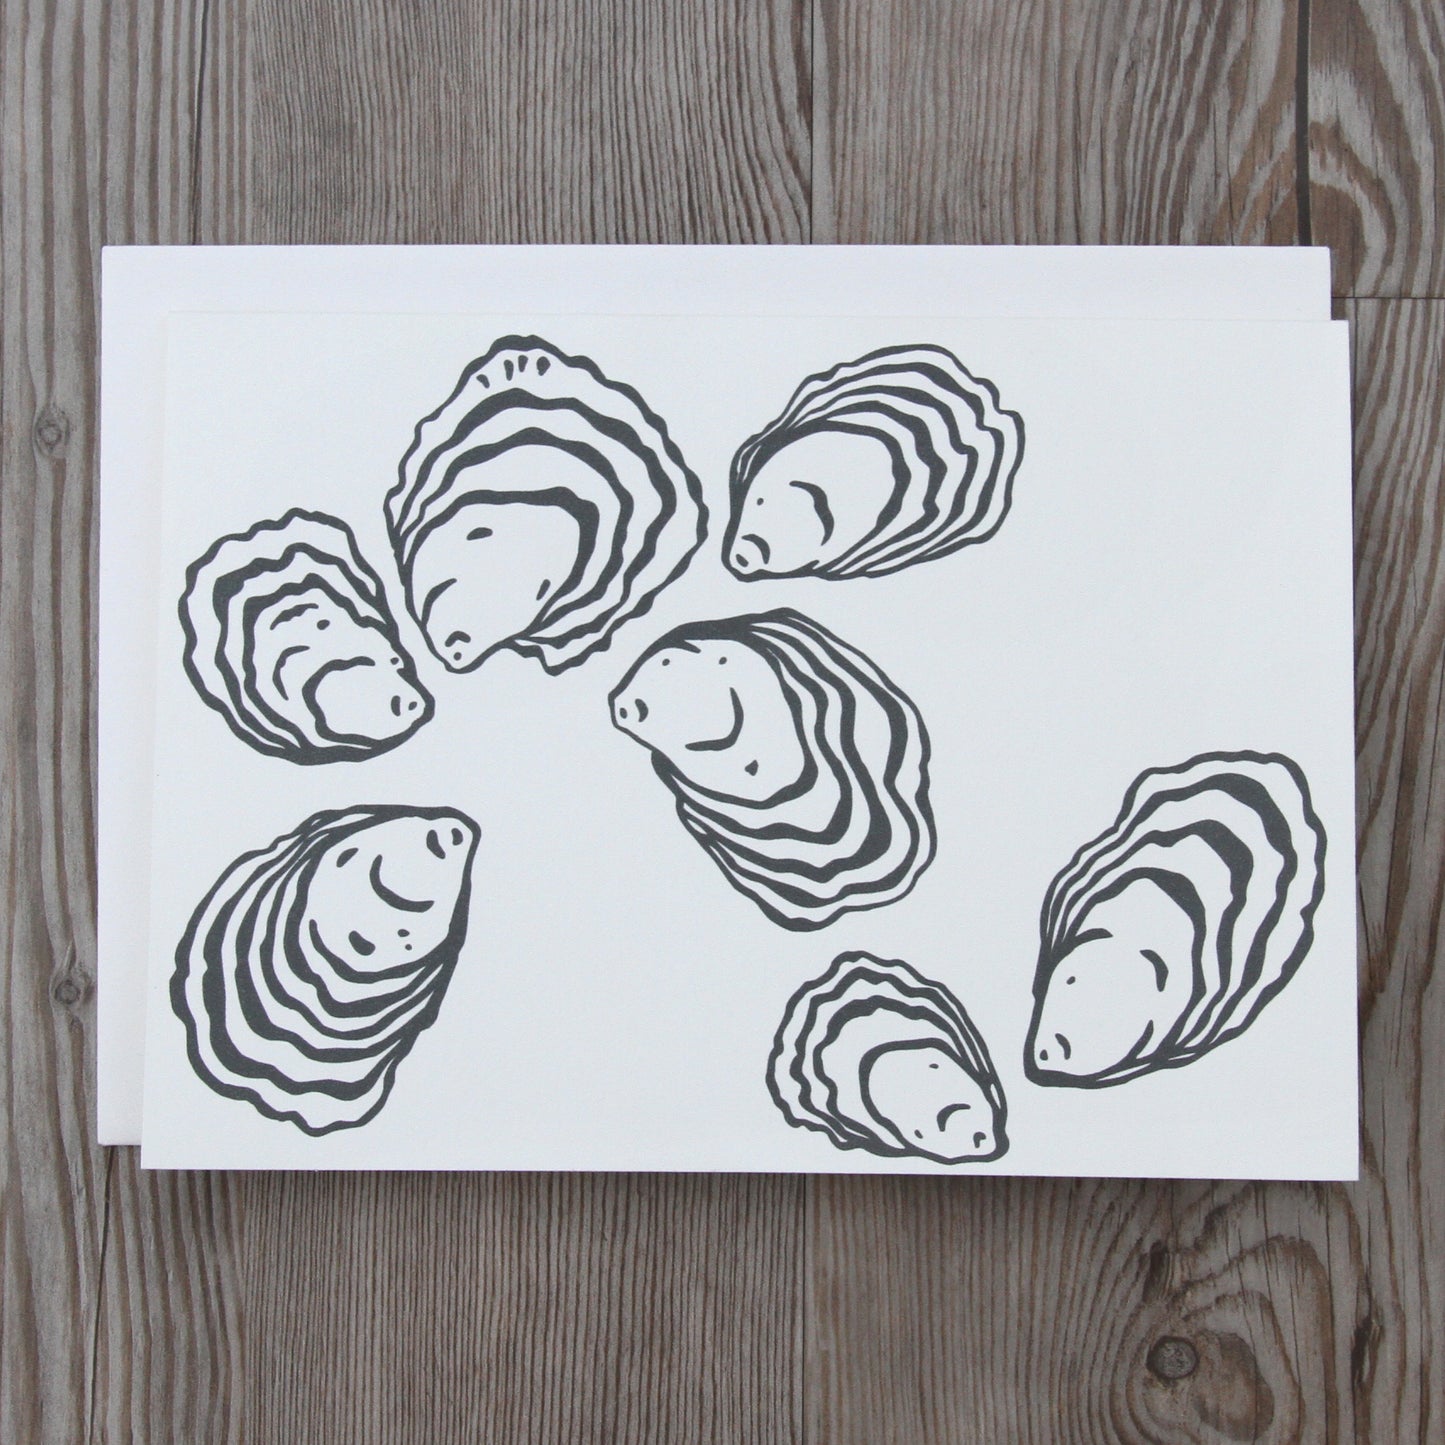 6 Oyster Notecards